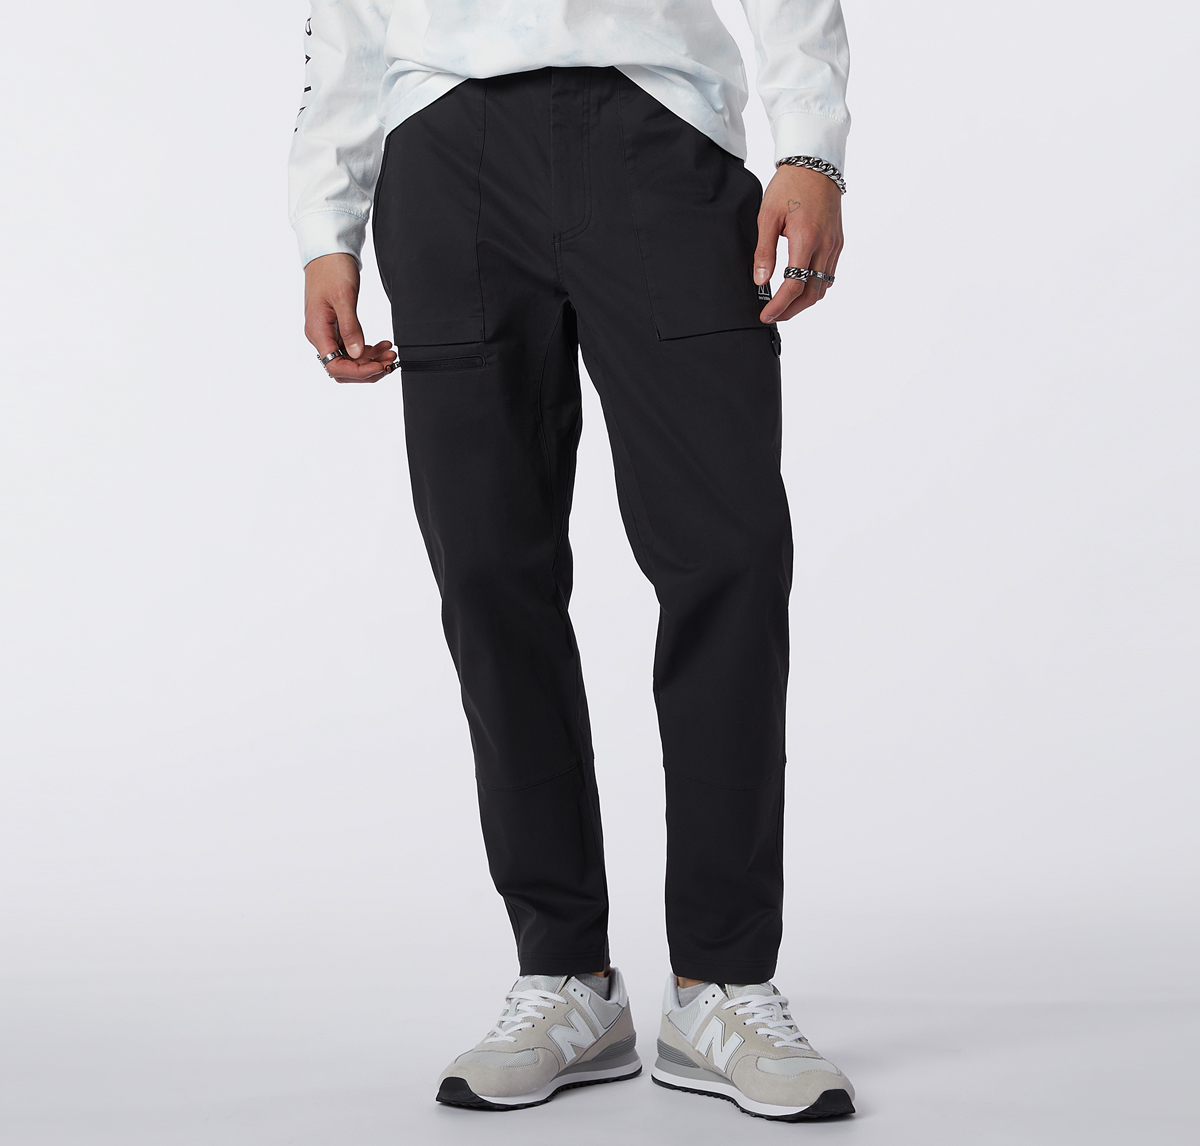 New Balance All Terrain Woven Pant - Black front